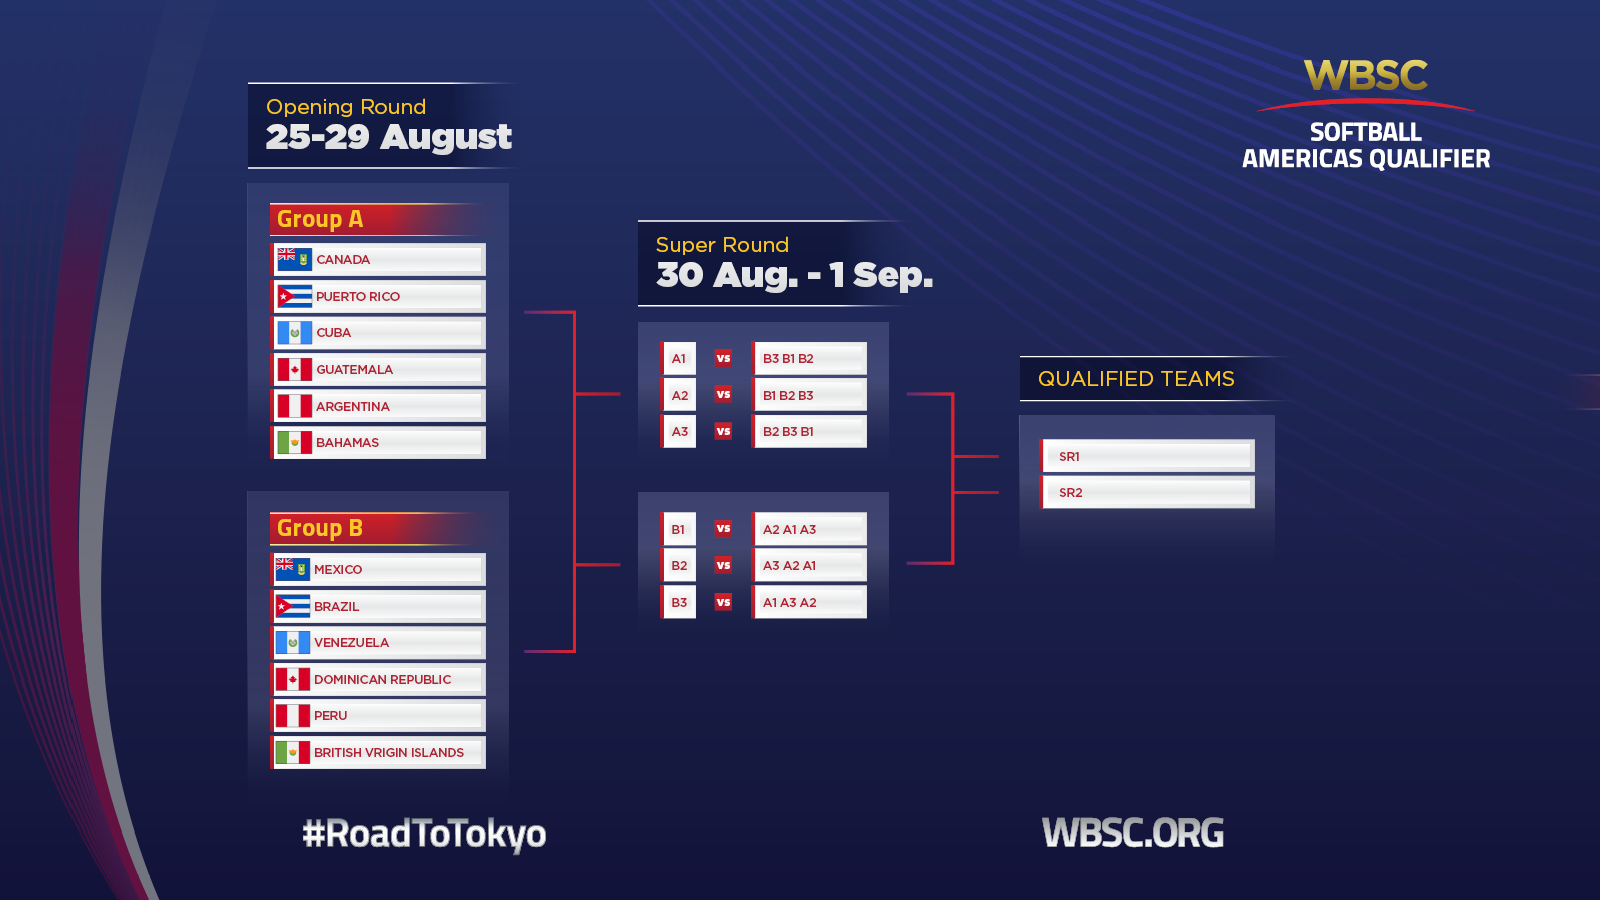 The two teams with the best overall records following the super round will earn qualification from the Americas into the Olympic softball tournament at Tokyo 2020 ©WBSC